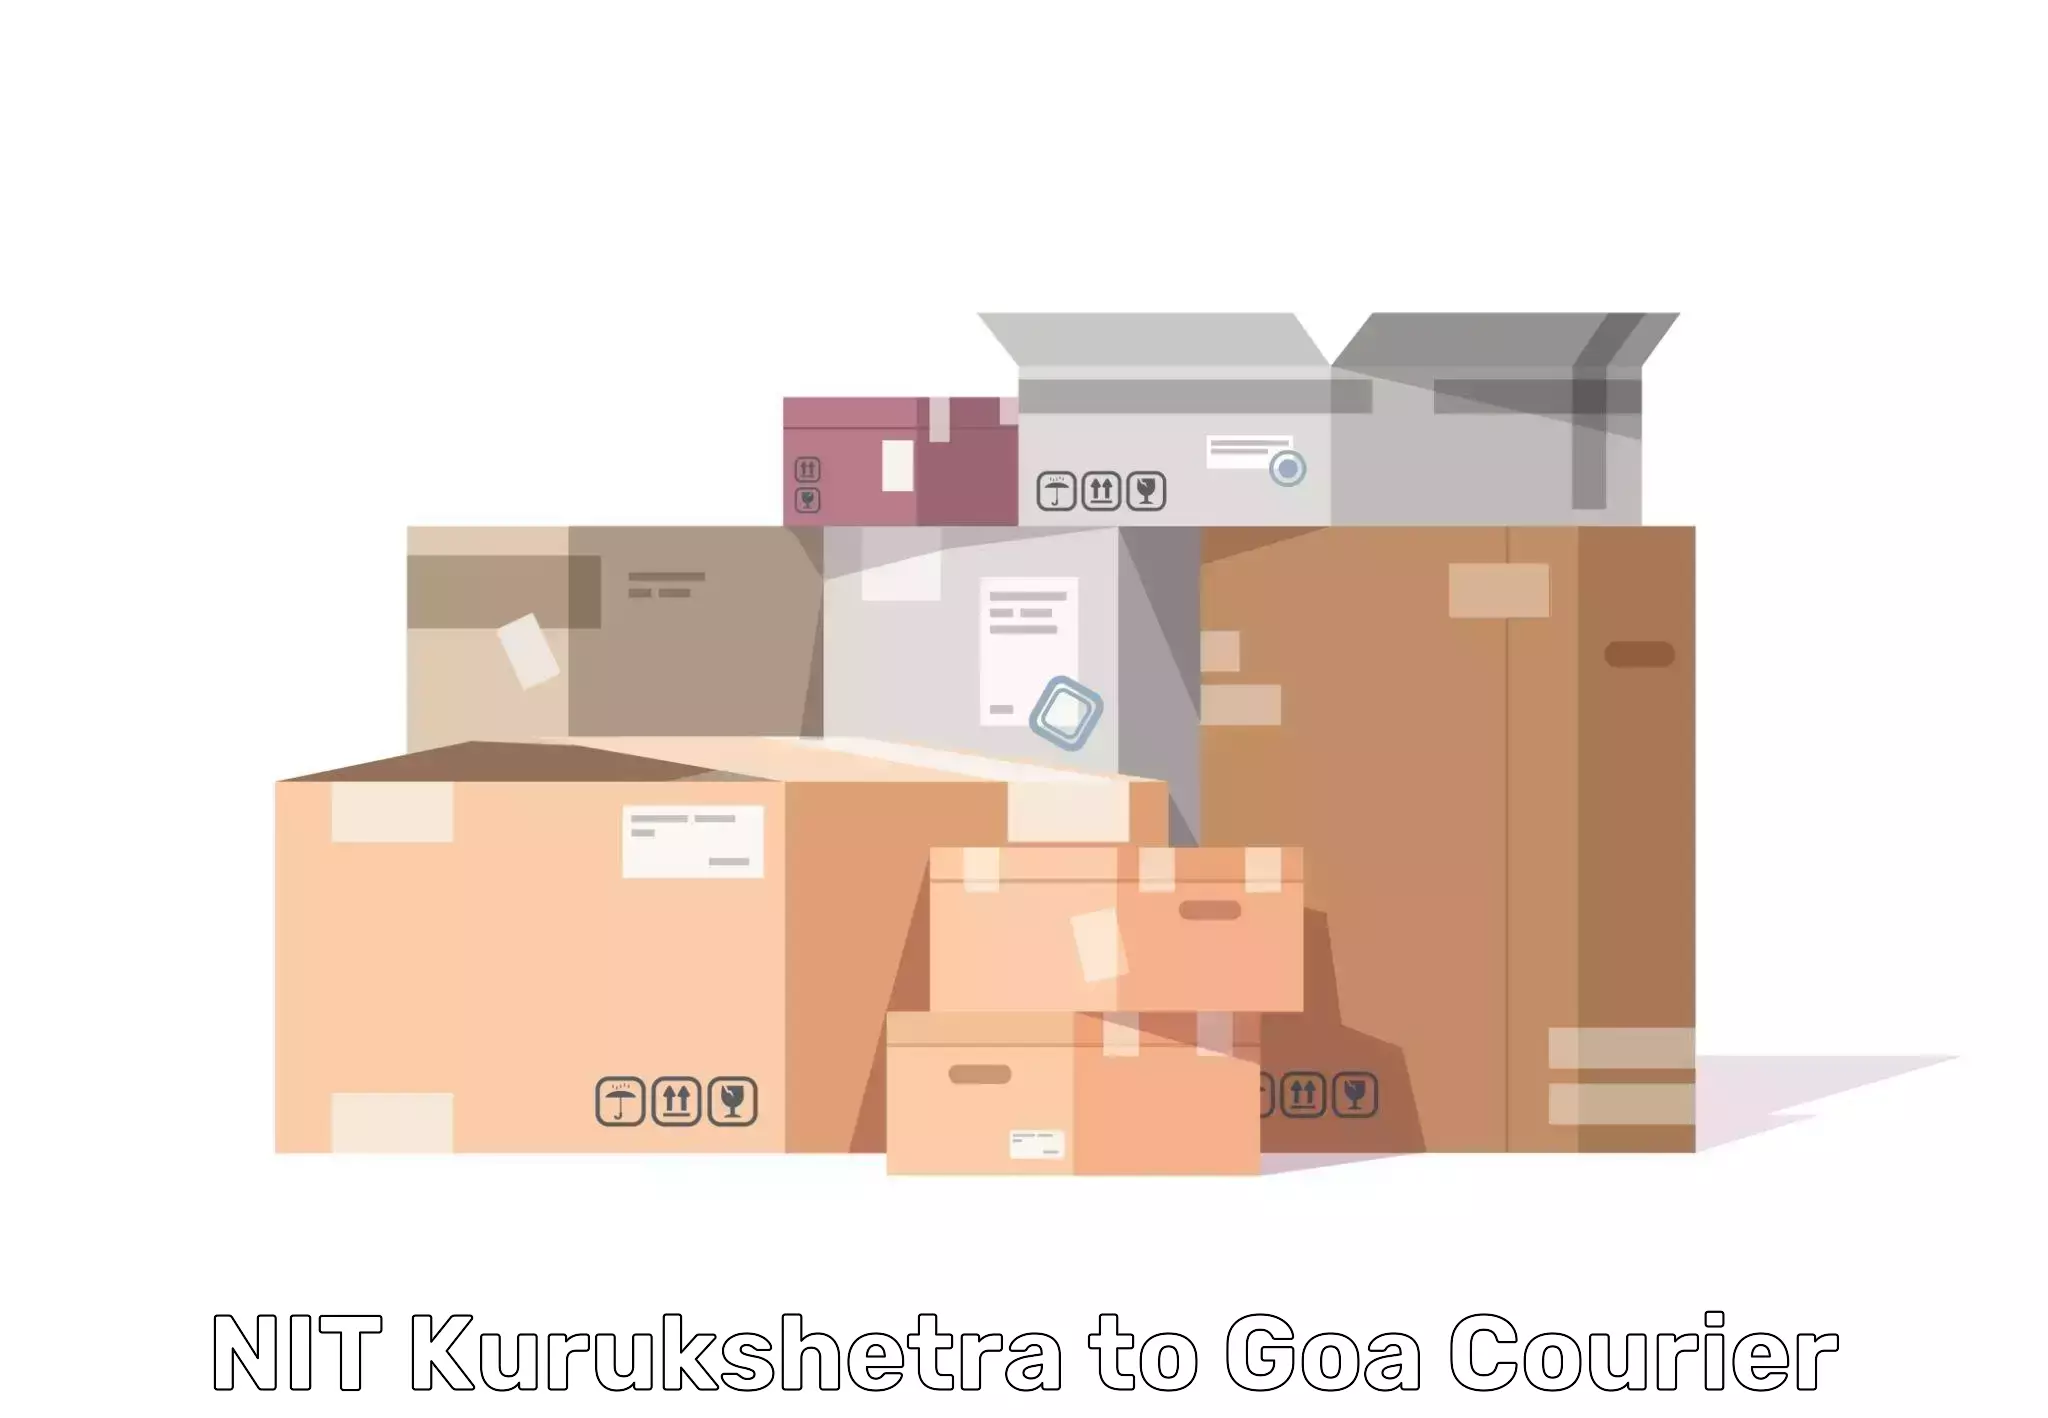 Quality relocation assistance in NIT Kurukshetra to IIT Goa